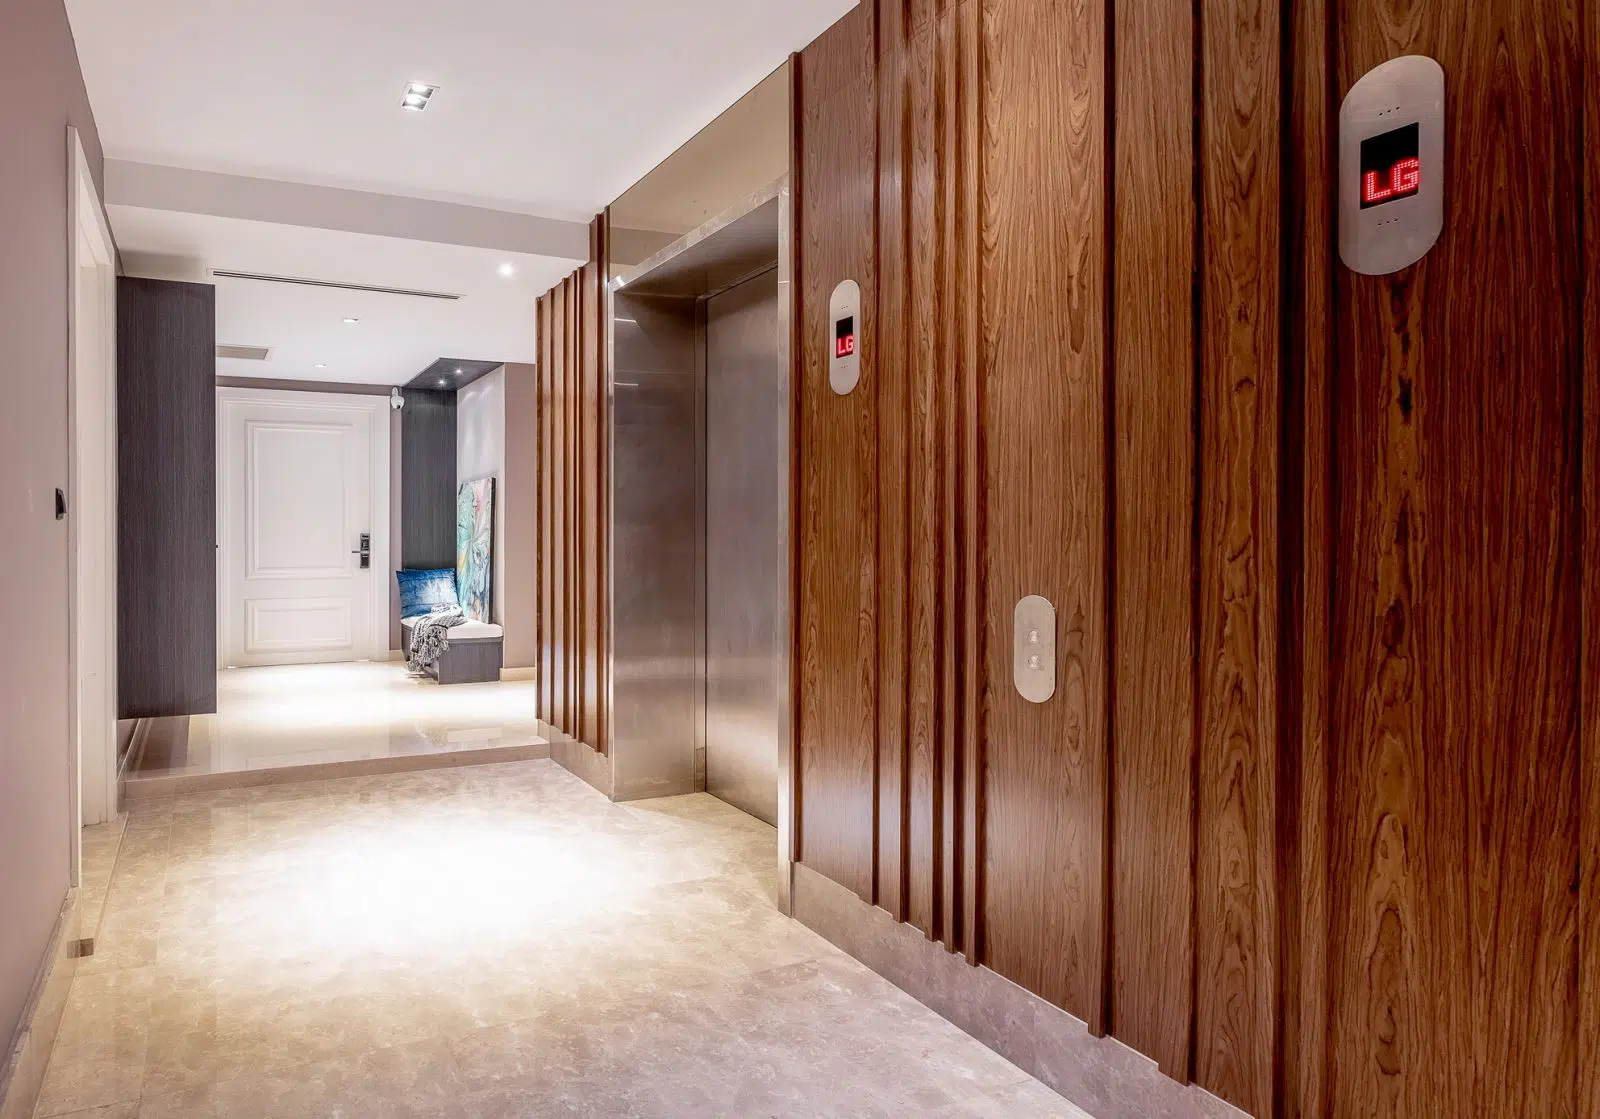 Above: walnut wood wall panels on the personal lift corridor outside.